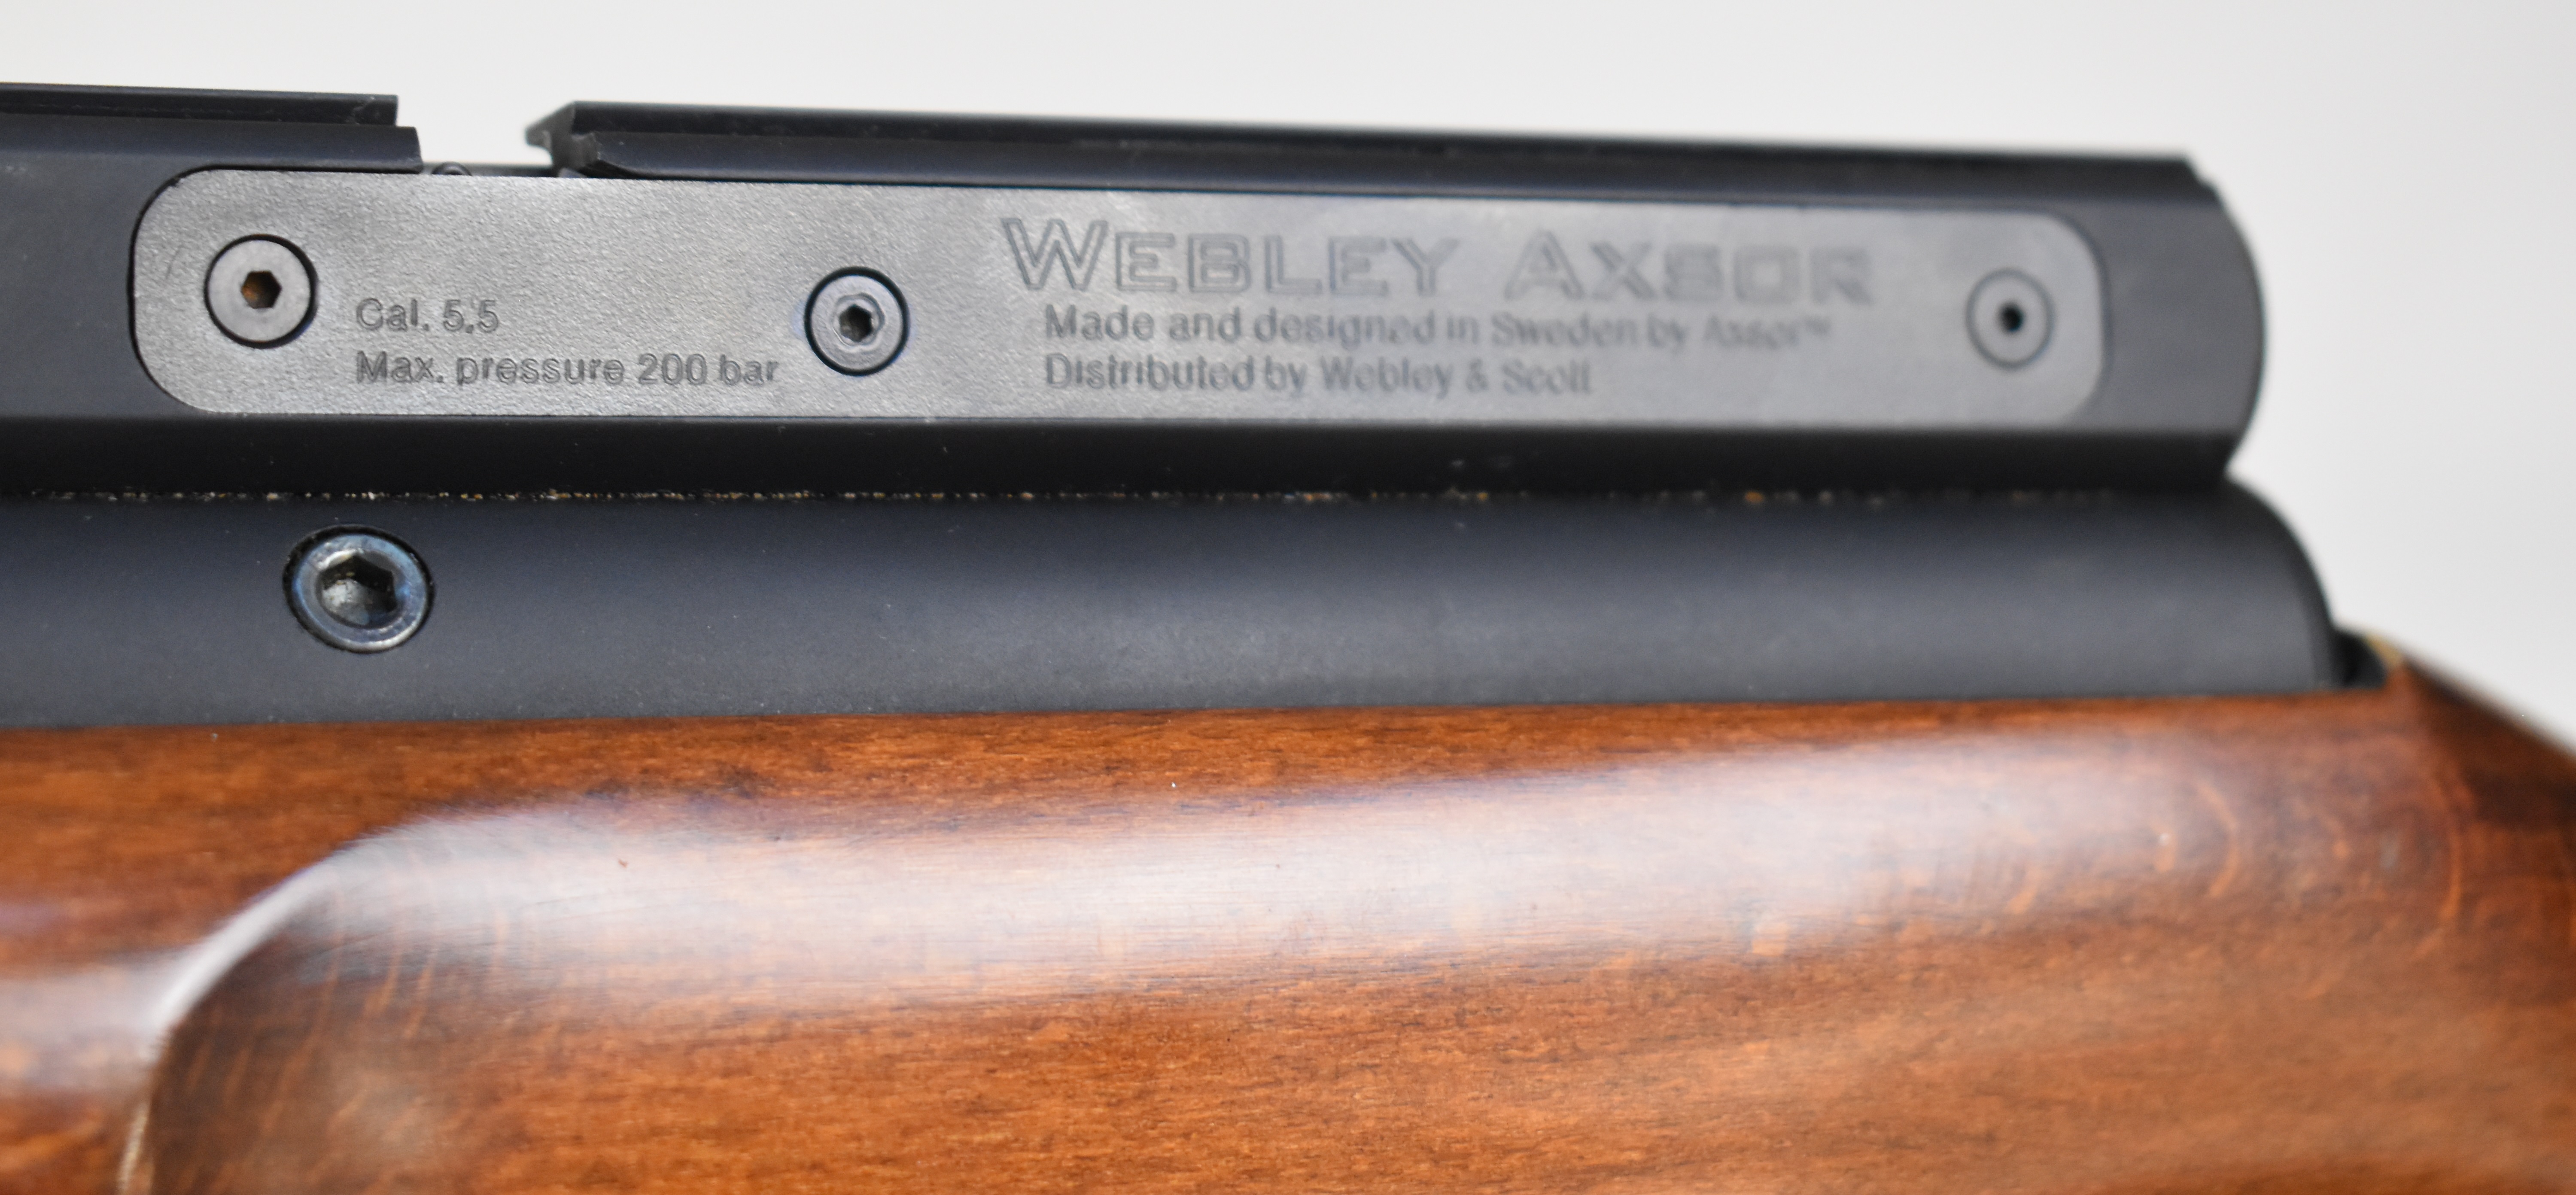 Webley Axsor .22 PCP air rifle with chequered semi-pistol grip and forend, raised cheek piece, - Image 20 of 20